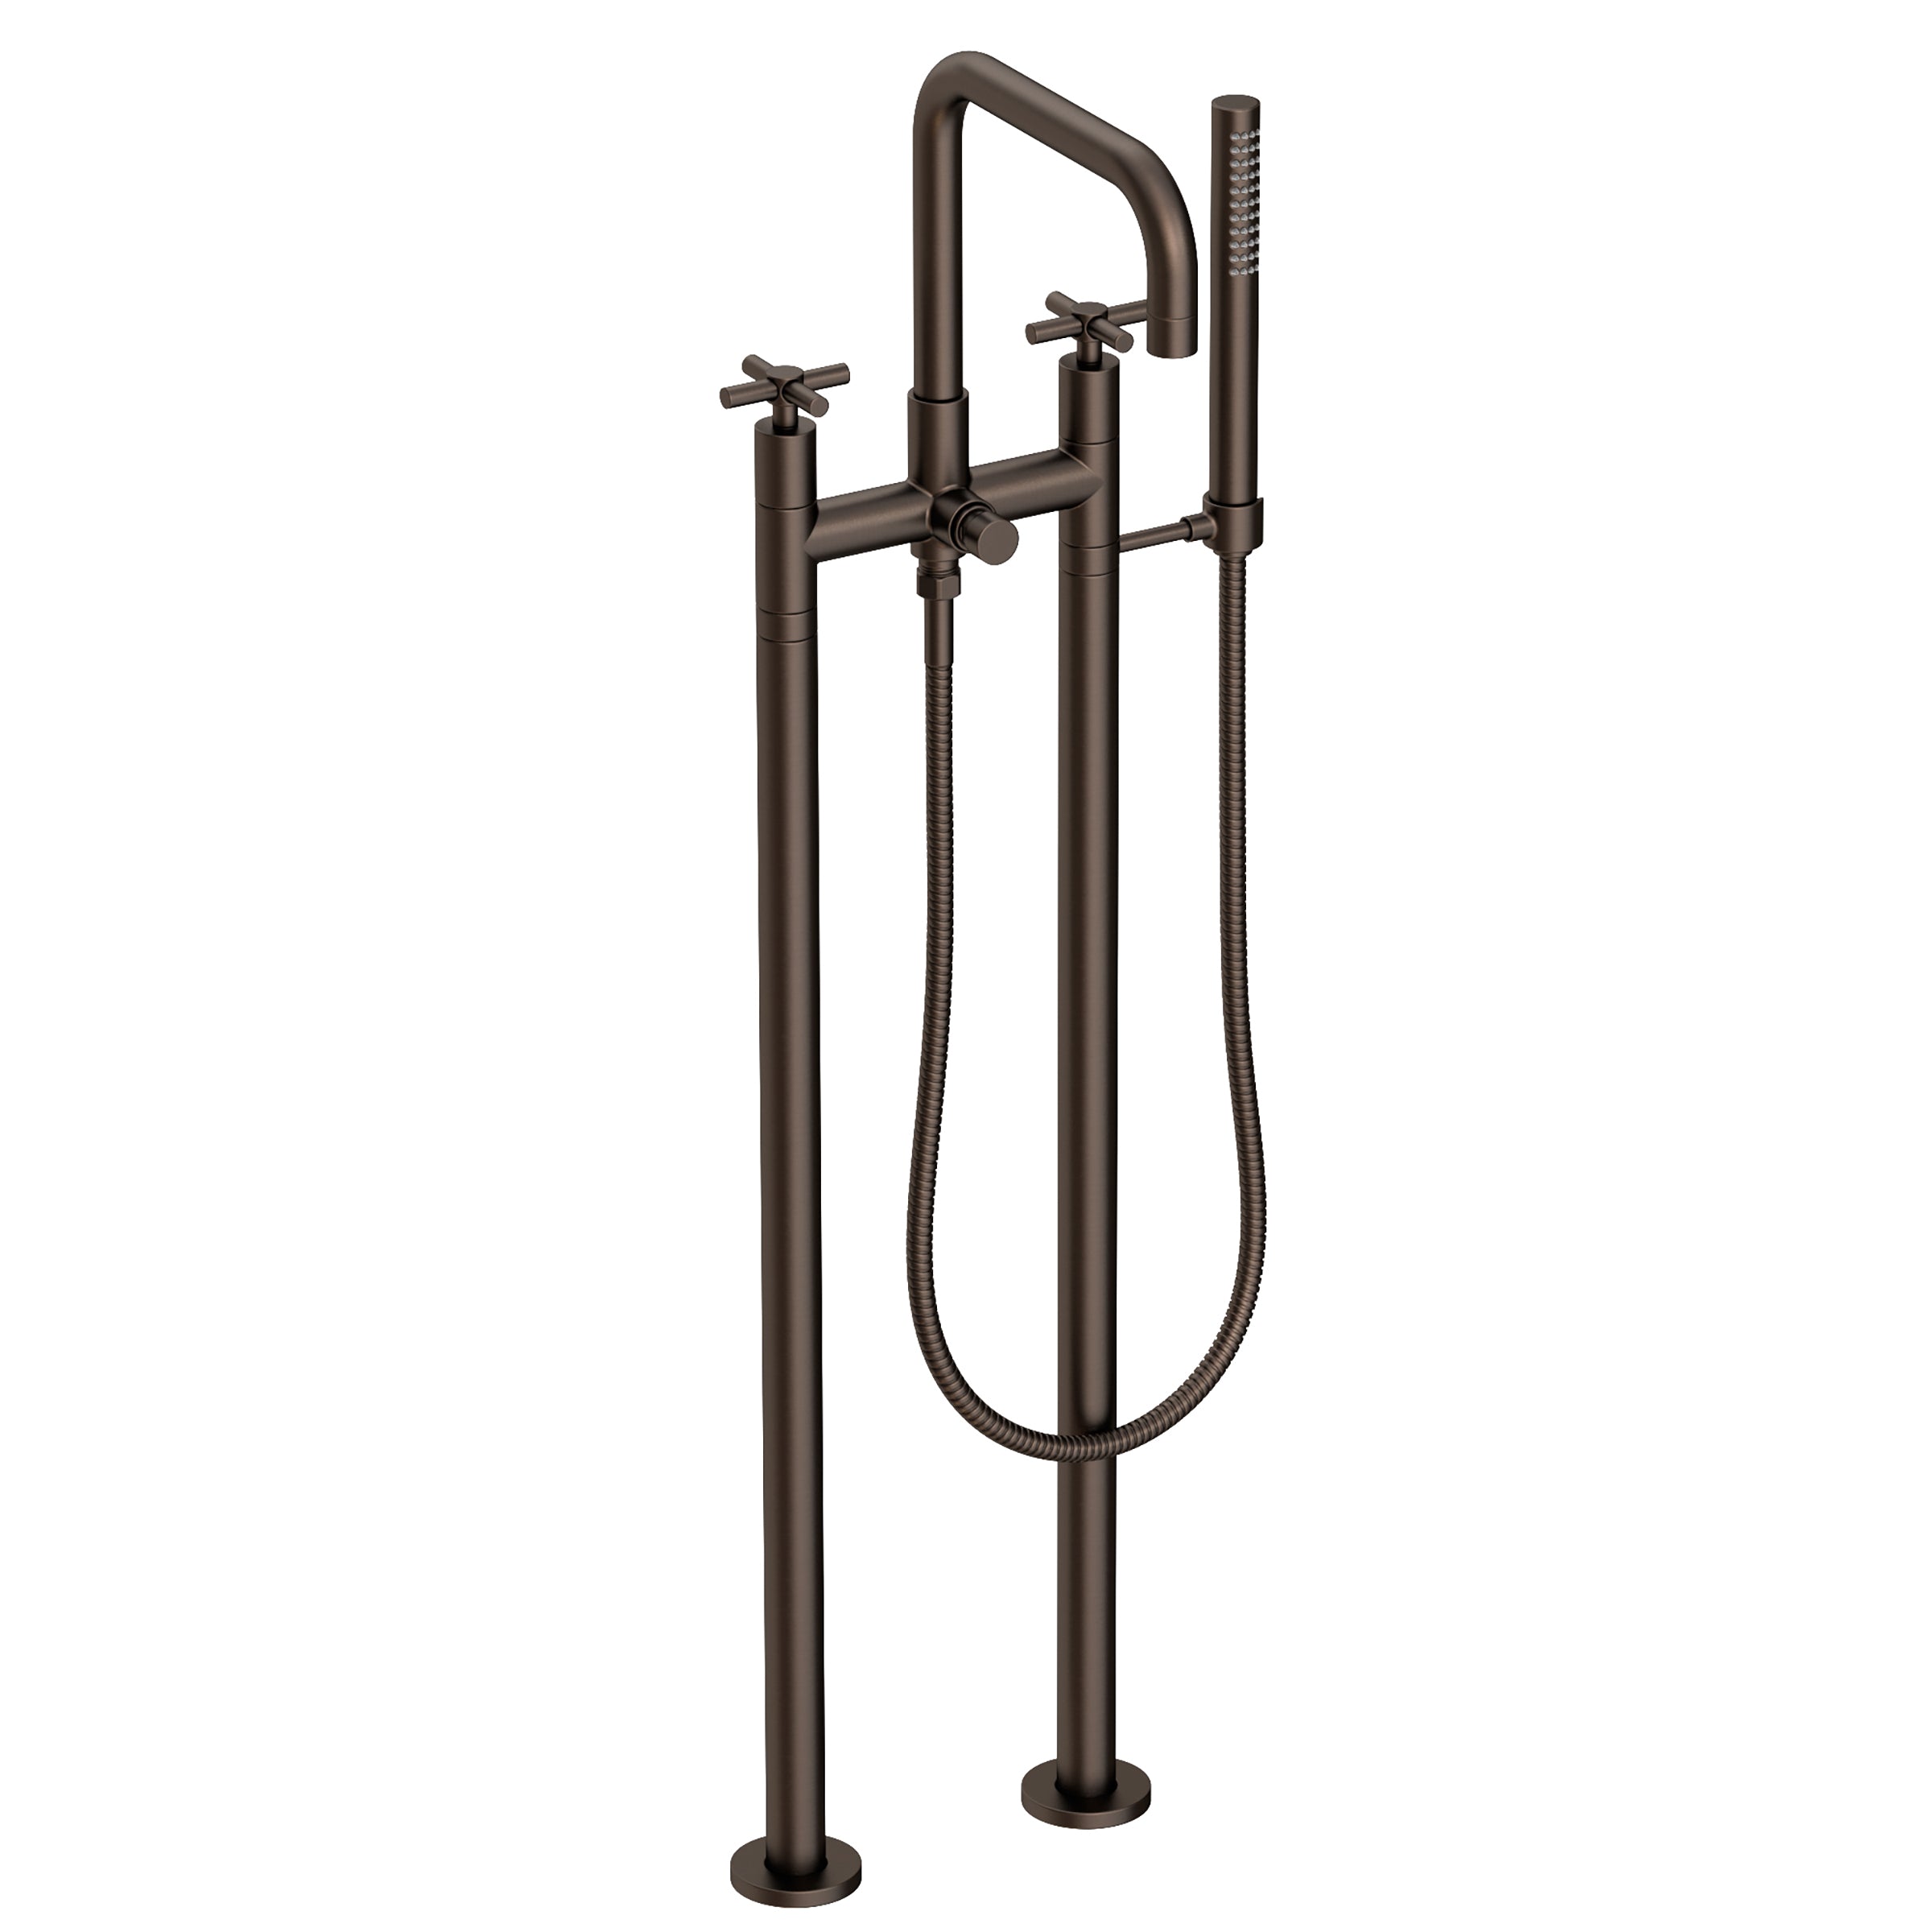 Newport Brass East Square Exposed Tub & Hand Shower Set w/Risers